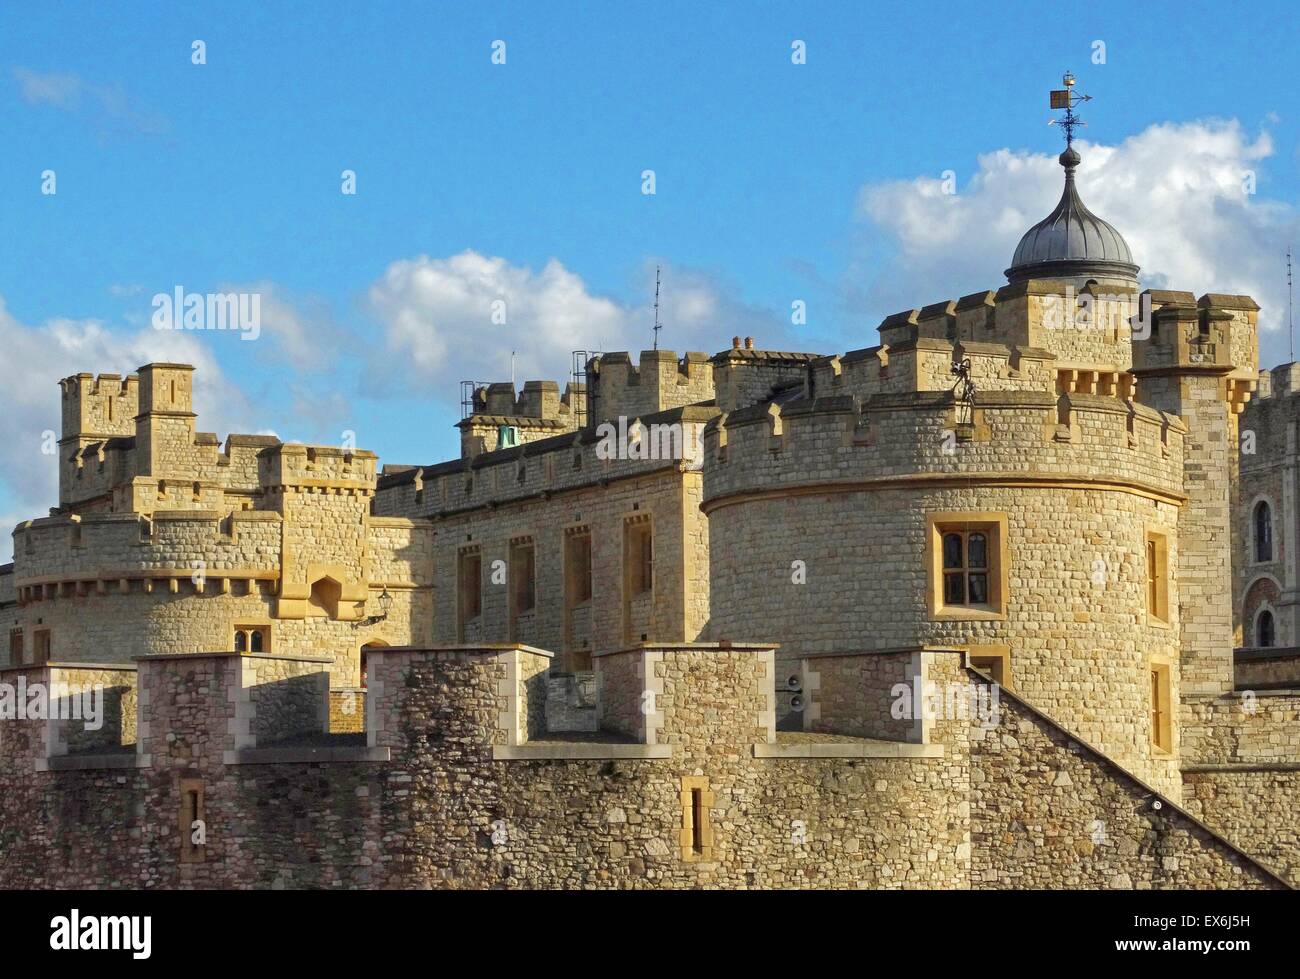 Colour photograph of the Tower of London, a historic castle located on the north bank of the River Thames in central London. Construction began in the 11th Century. Dated 2014 Stock Photo